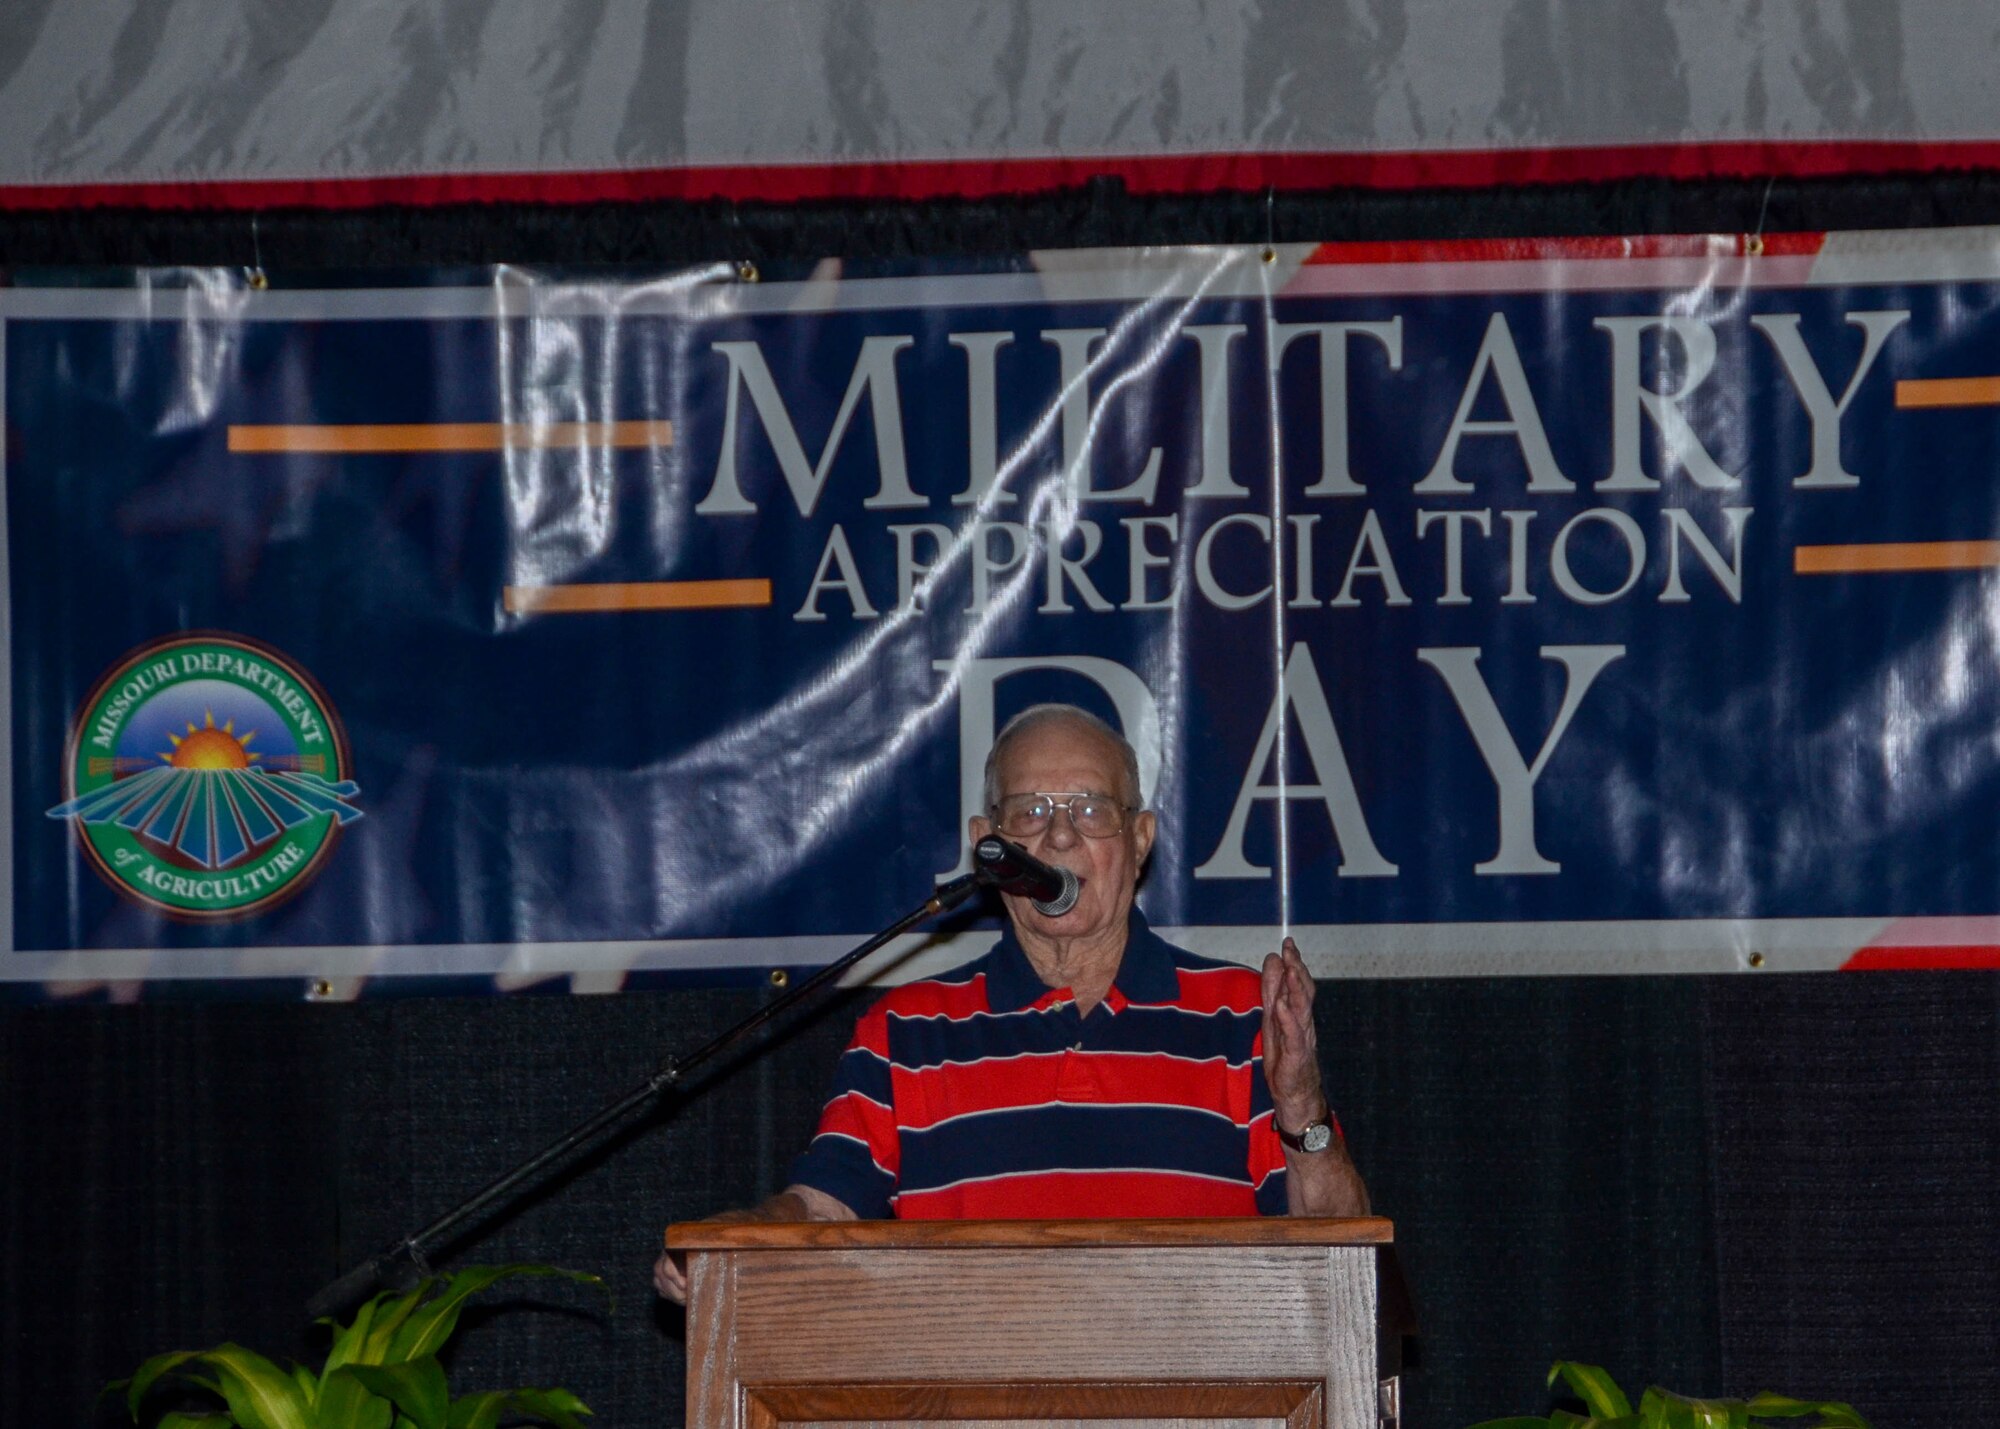 Dale Mitchell, a World War II veteran and POW from Missouri recounts his memories of WWII and thanks all the servicemen and women for their dedicated service at the Missouri State Fair August 16, 2015. (U.S. Air National Guard photo by Staff Sgt. Brittany Cannon)

